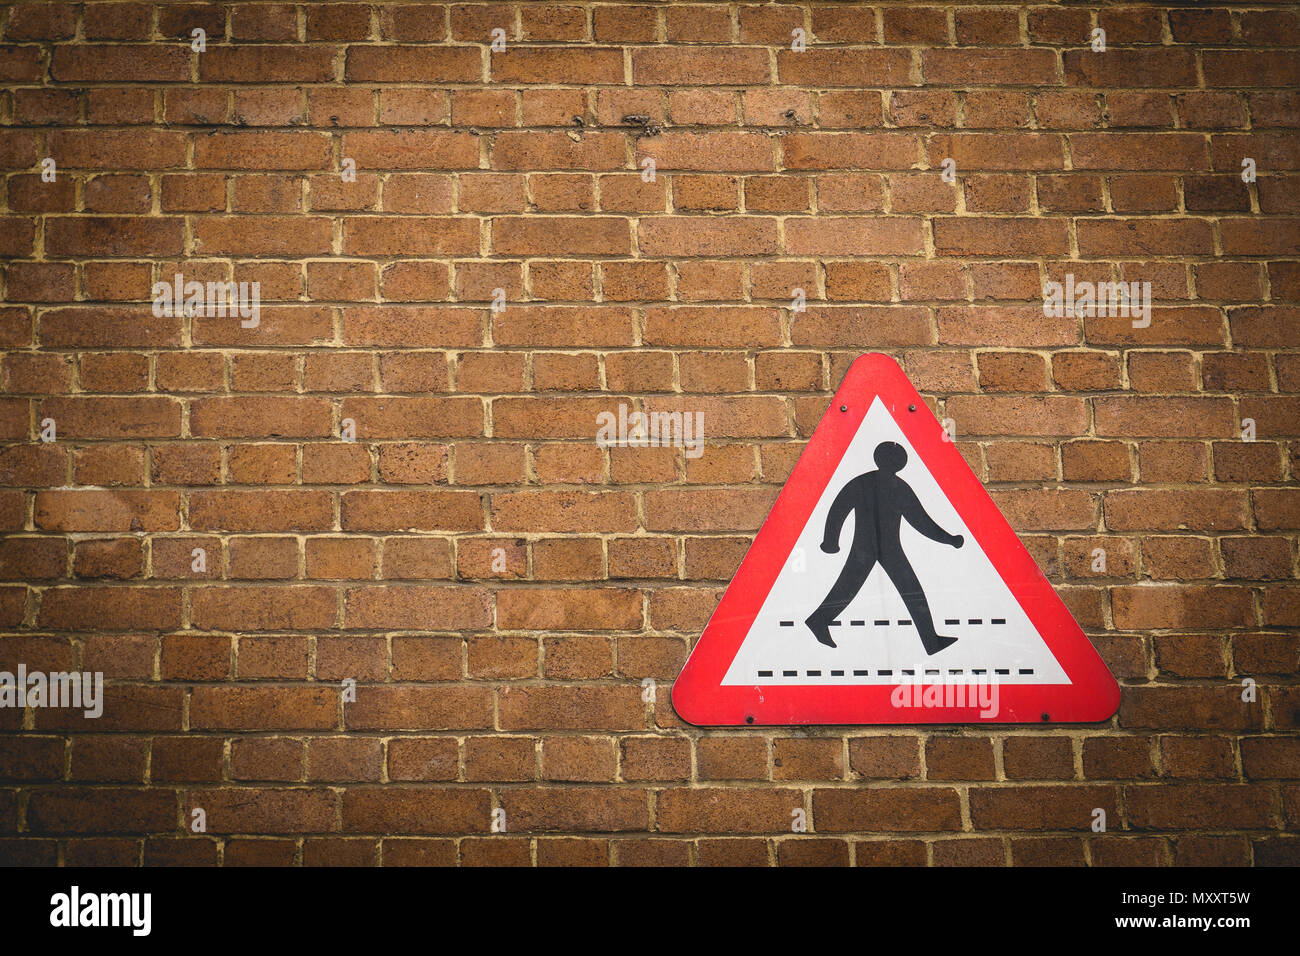 Vintage pedestrian crossing sign on a brick wall background. Landscape format. Stock Photo